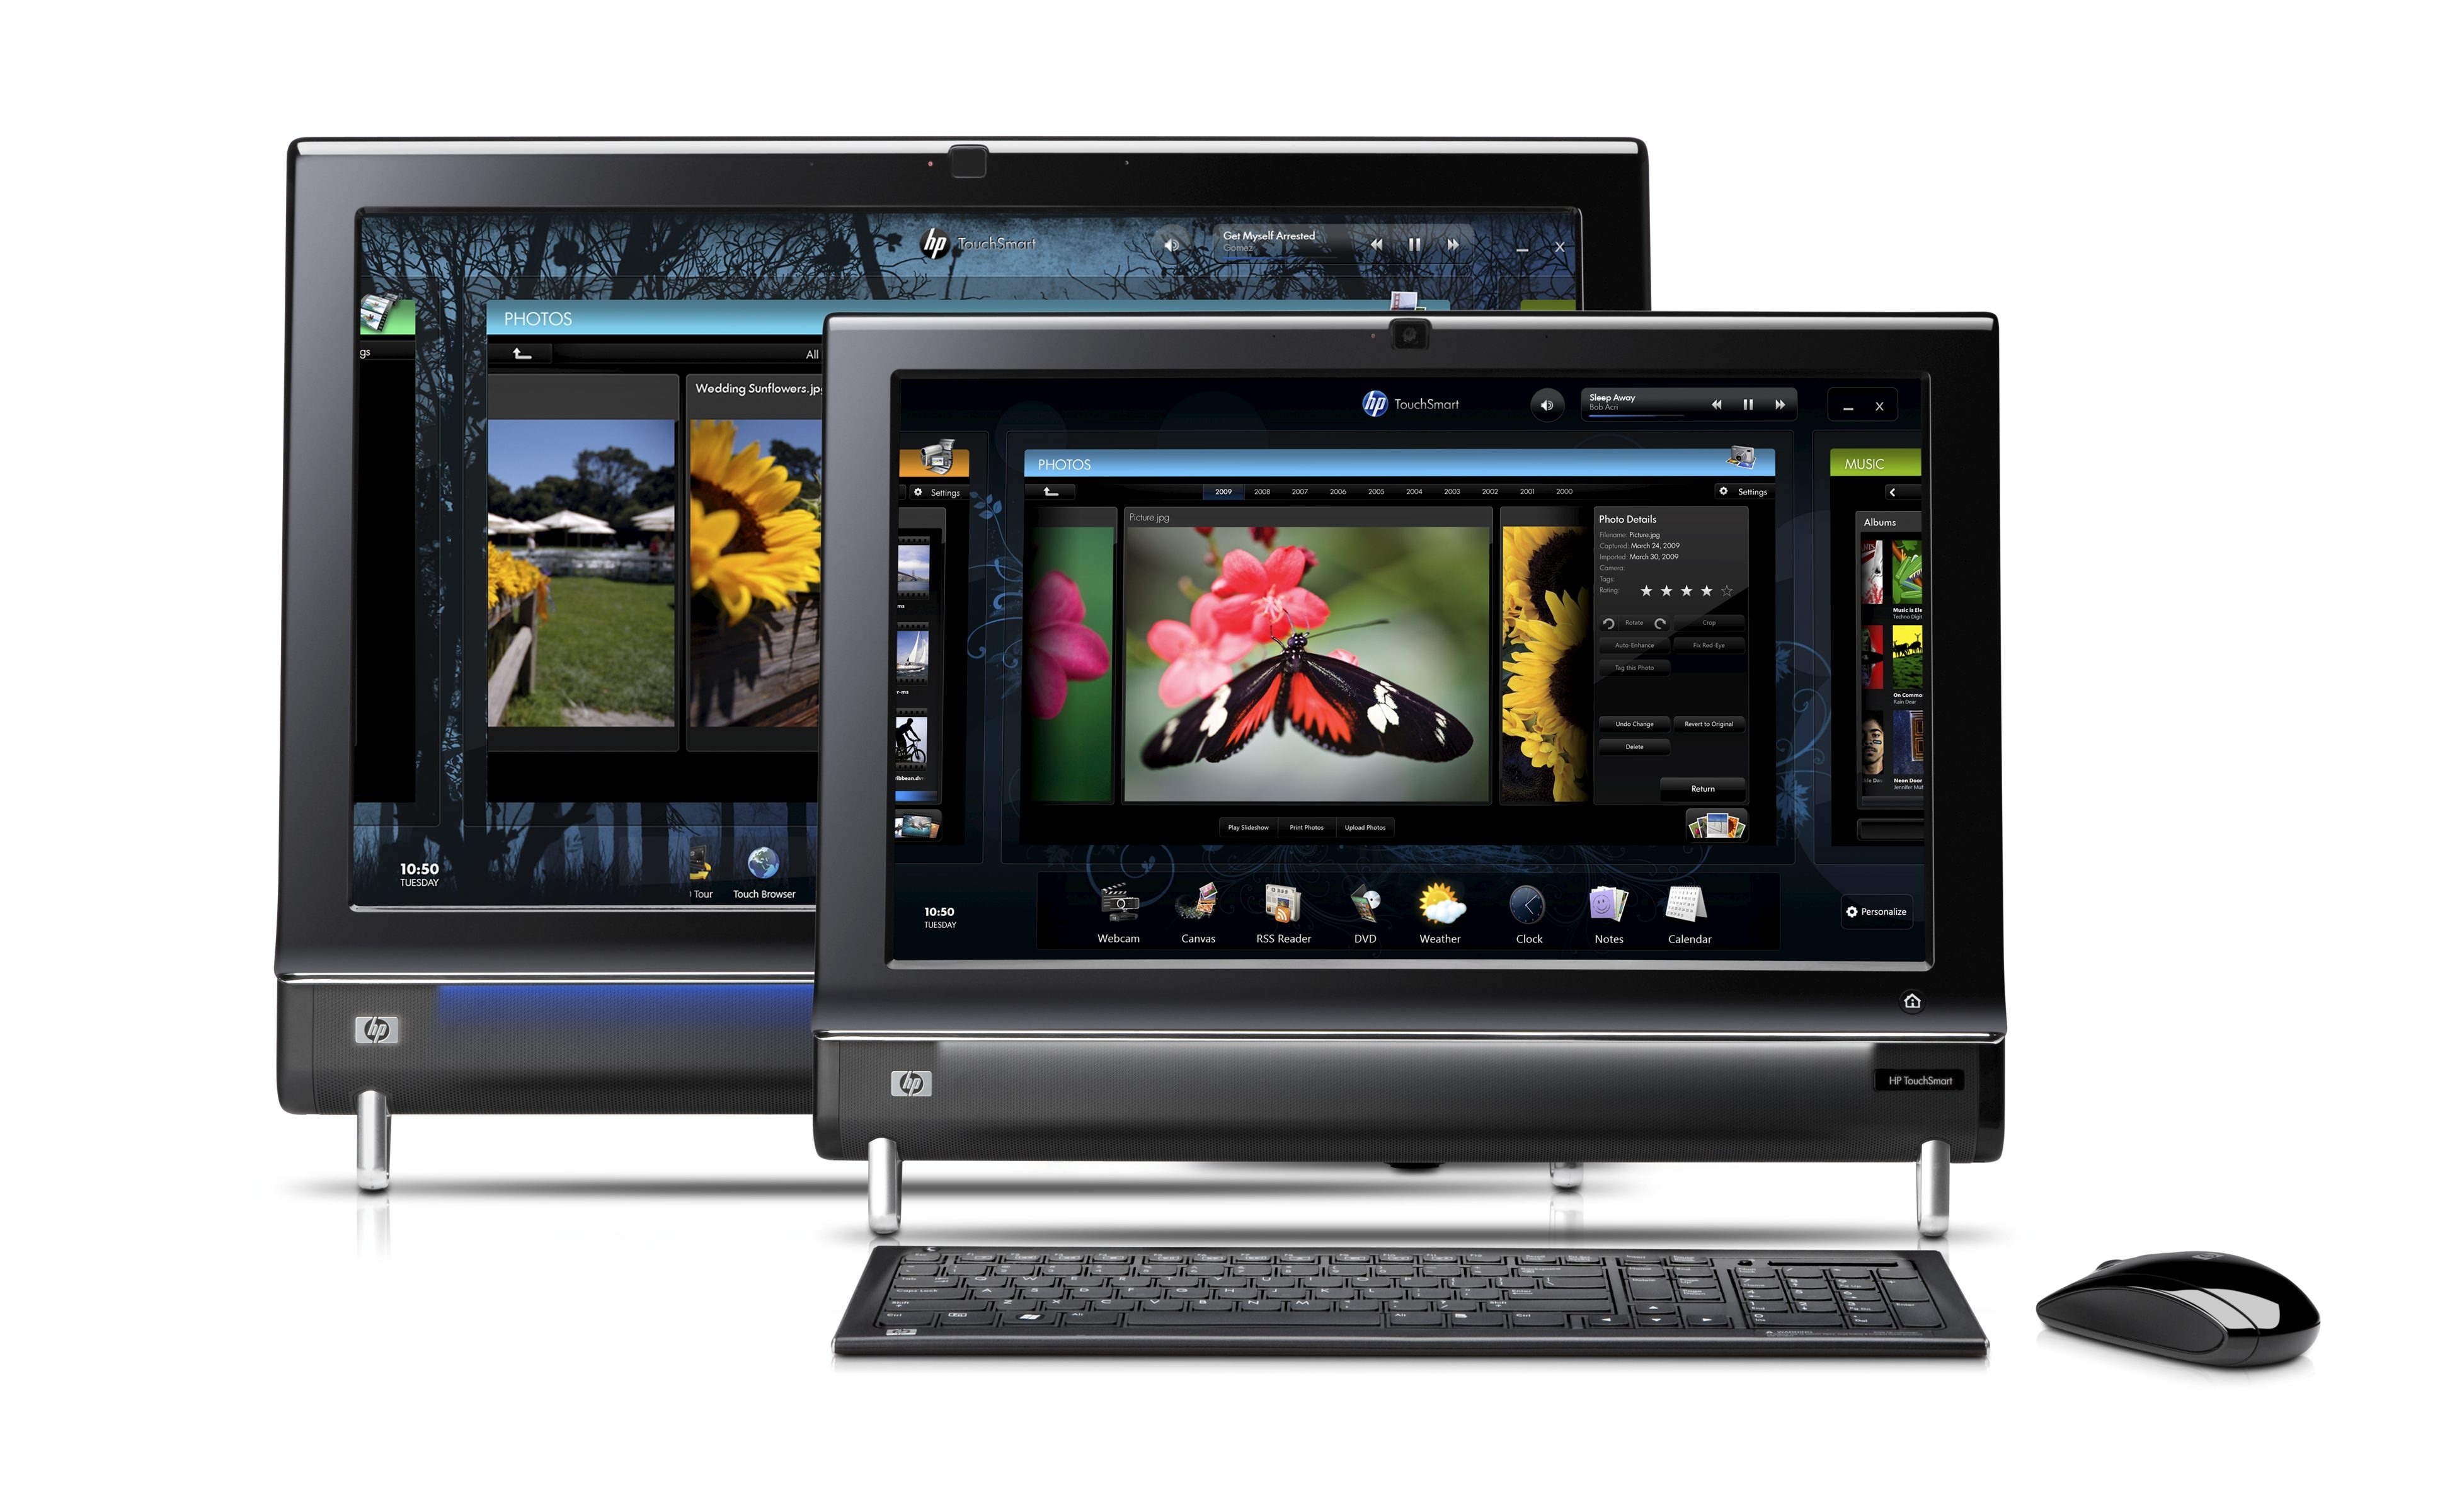 HP Gets All Touchy with New TouchSmart PCs and Display